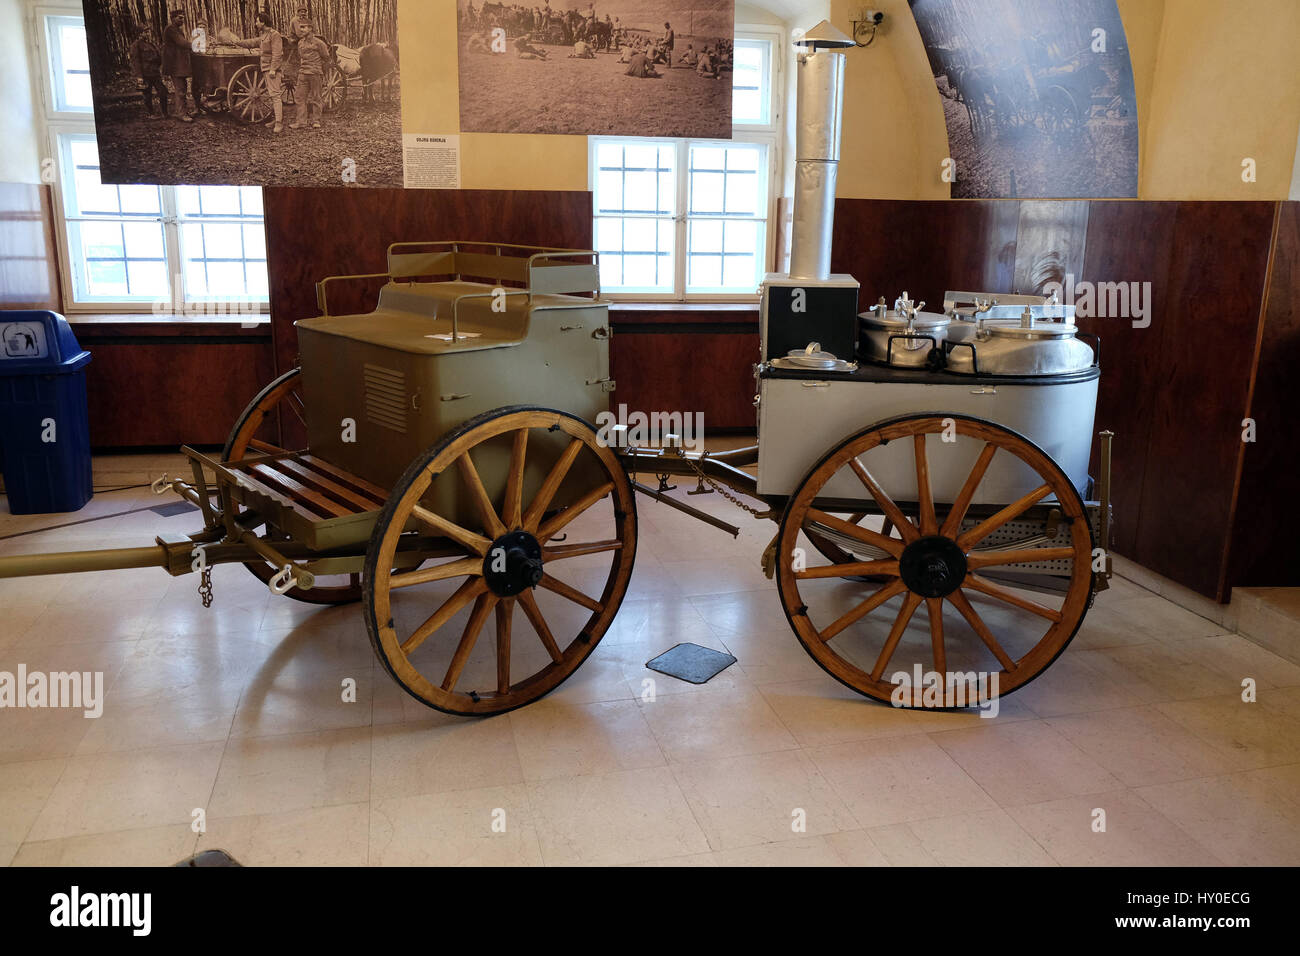 Mobile kitchen exhibited at the Museum of the City of Zagreb, Croatia Stock Photo